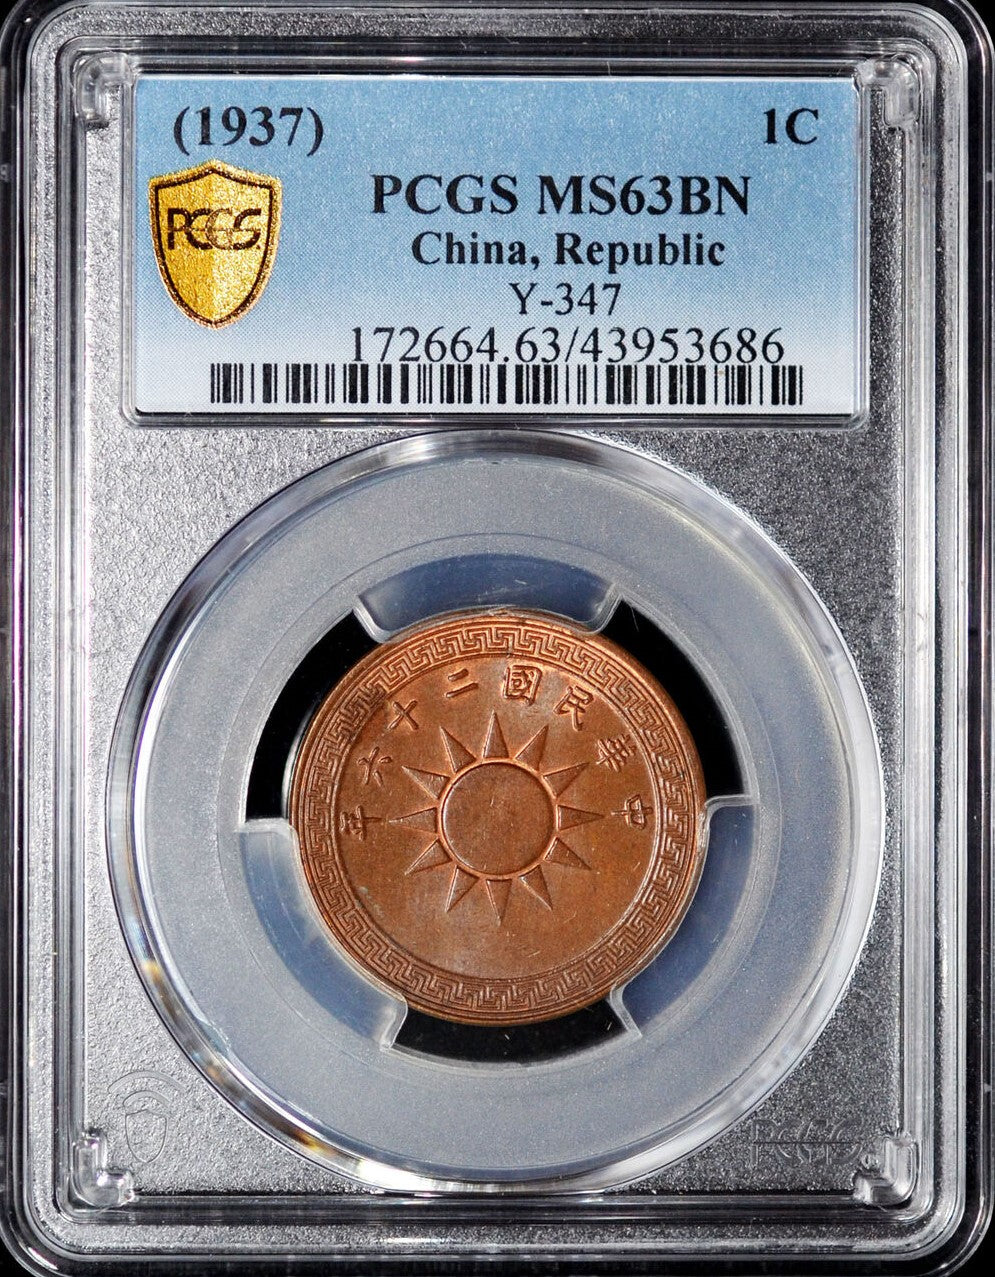 1937 Republic of China Cent One Fen (Year 26) Y-347 - PCGS MS63BN - Pleasant Choice Example!